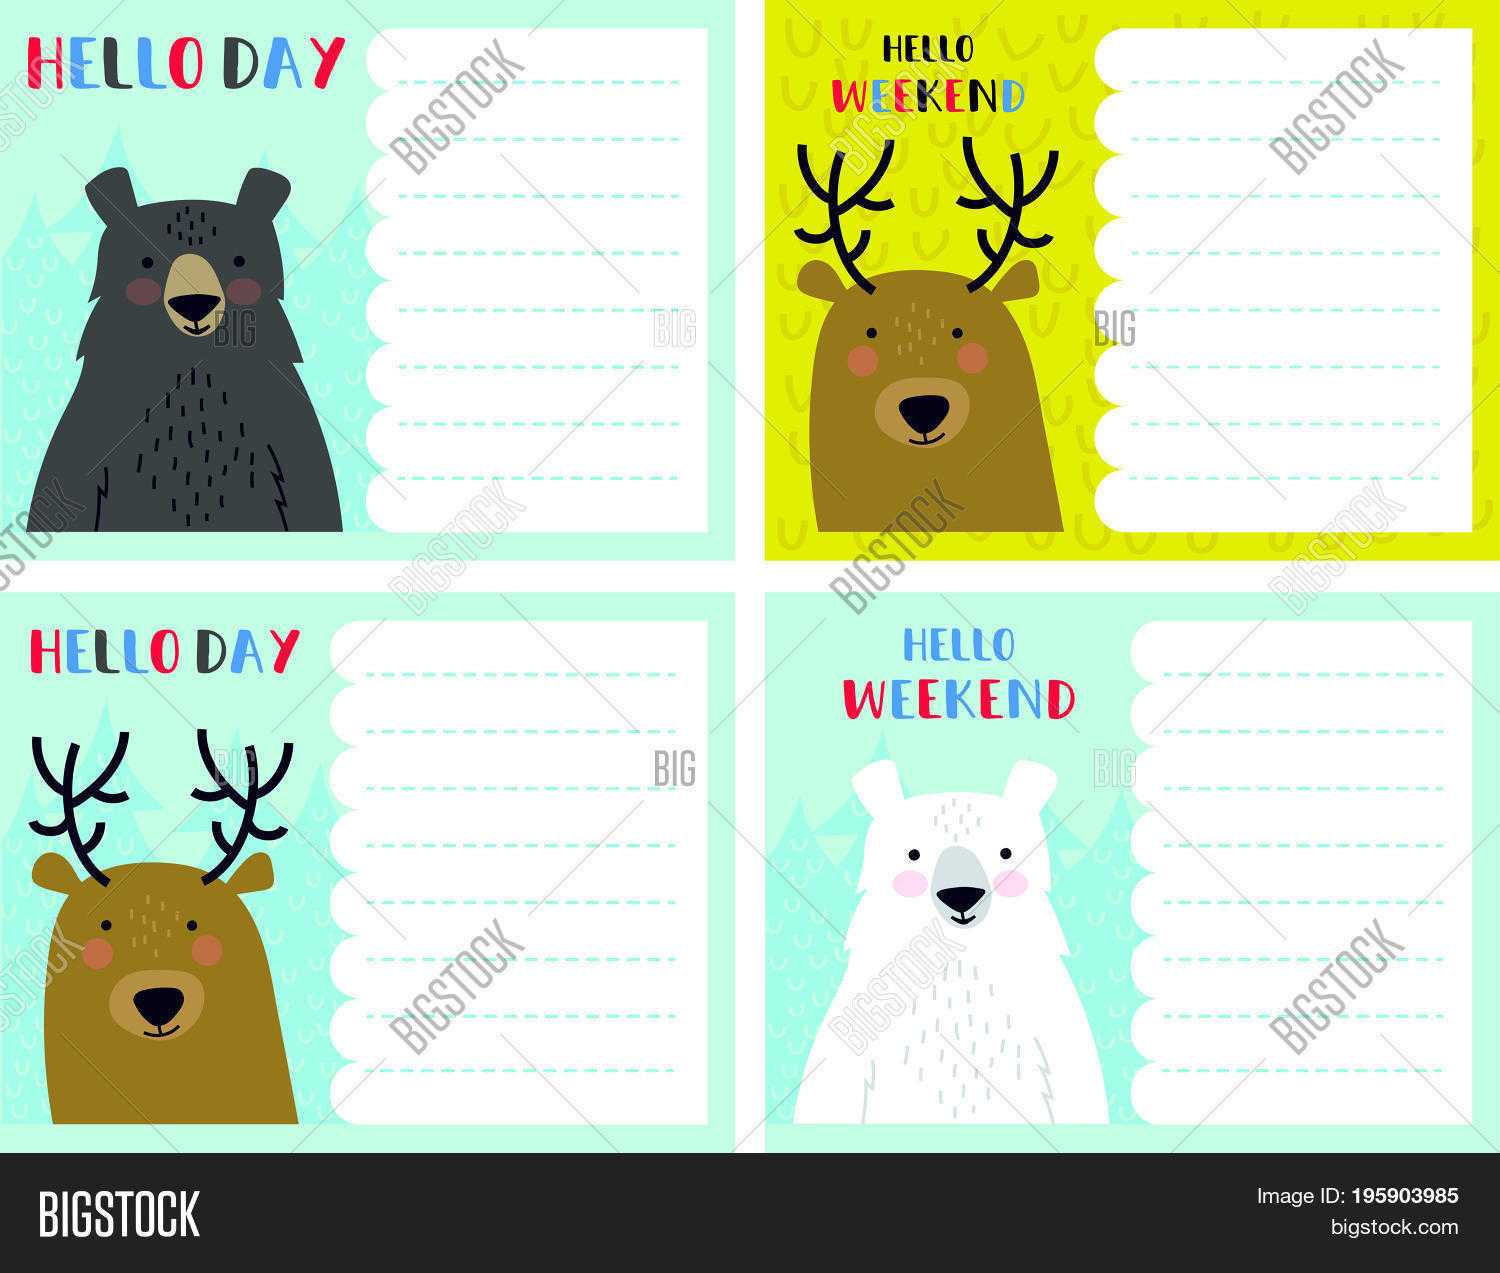 Vector Notes Card Set Vector & Photo (Free Trial) | Bigstock Within Christmas Note Card Templates